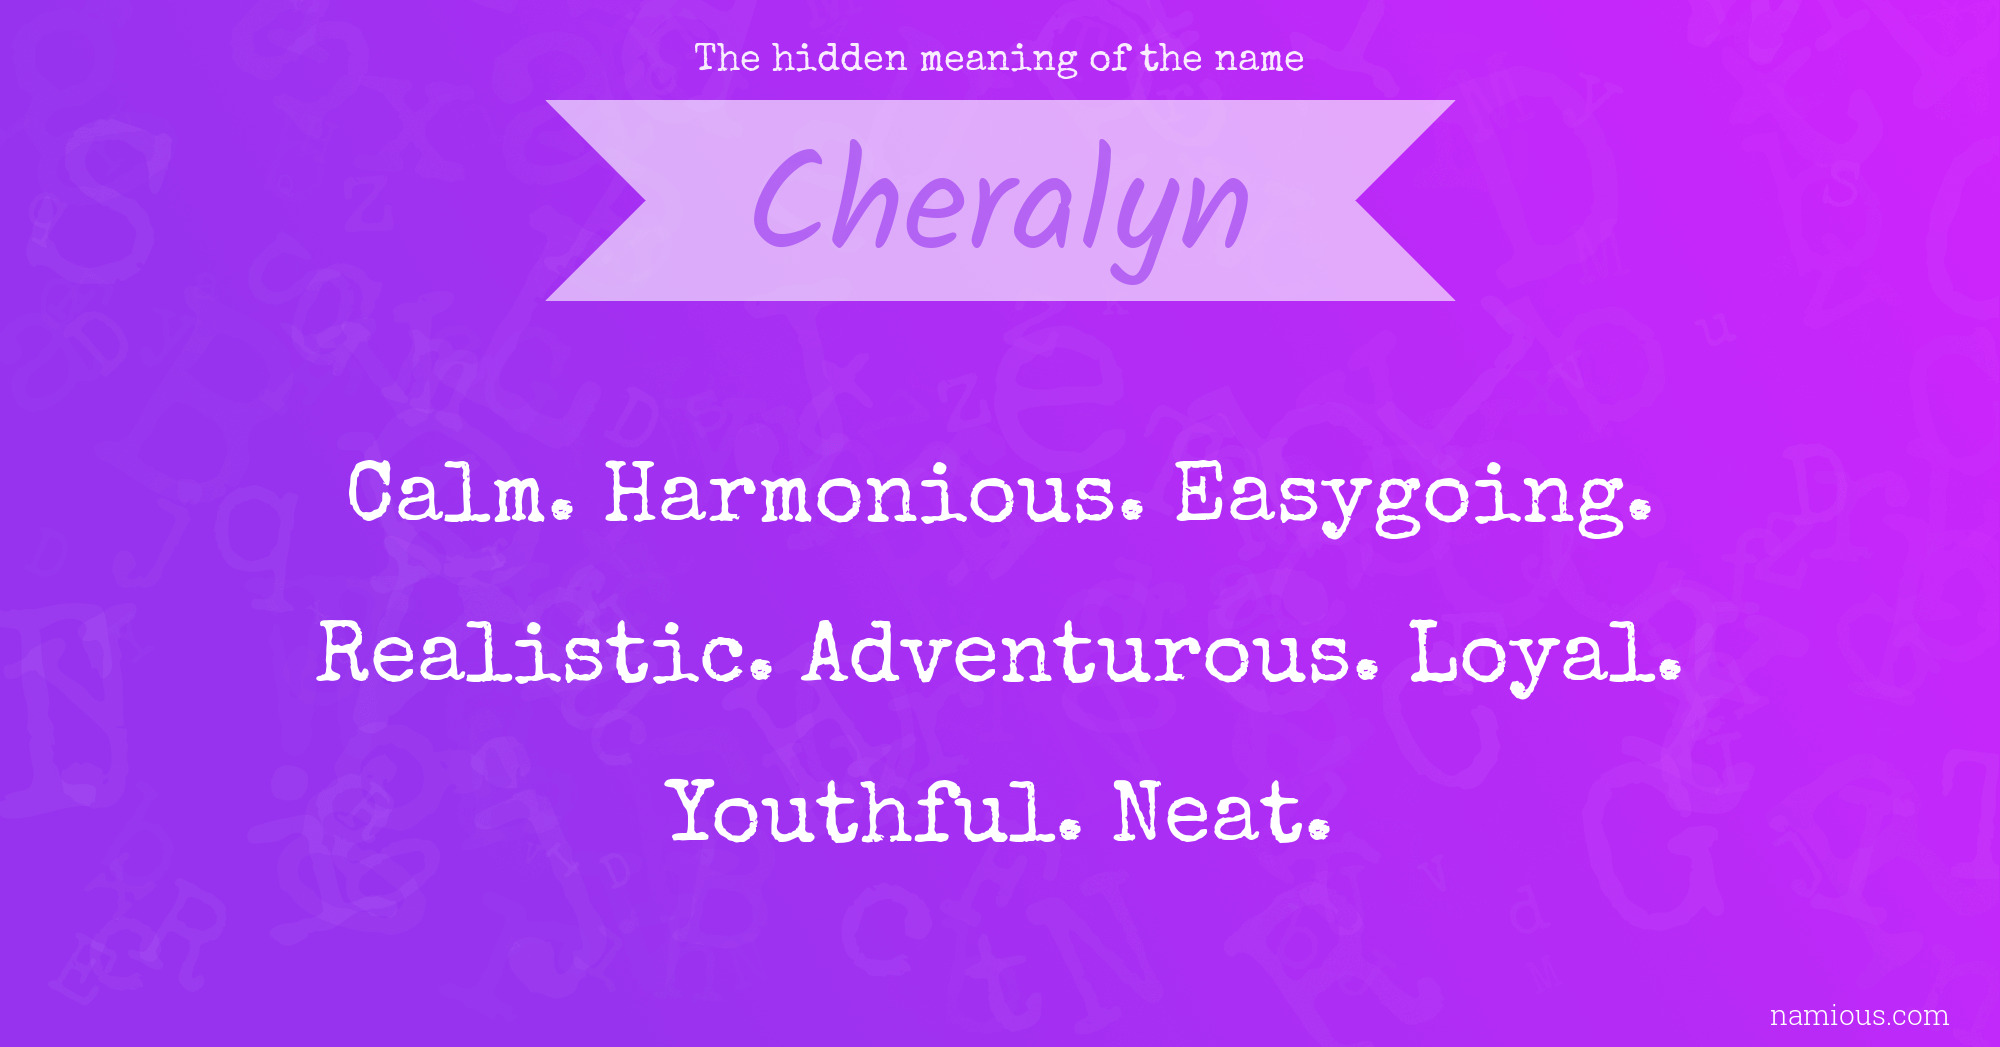 The hidden meaning of the name Cheralyn